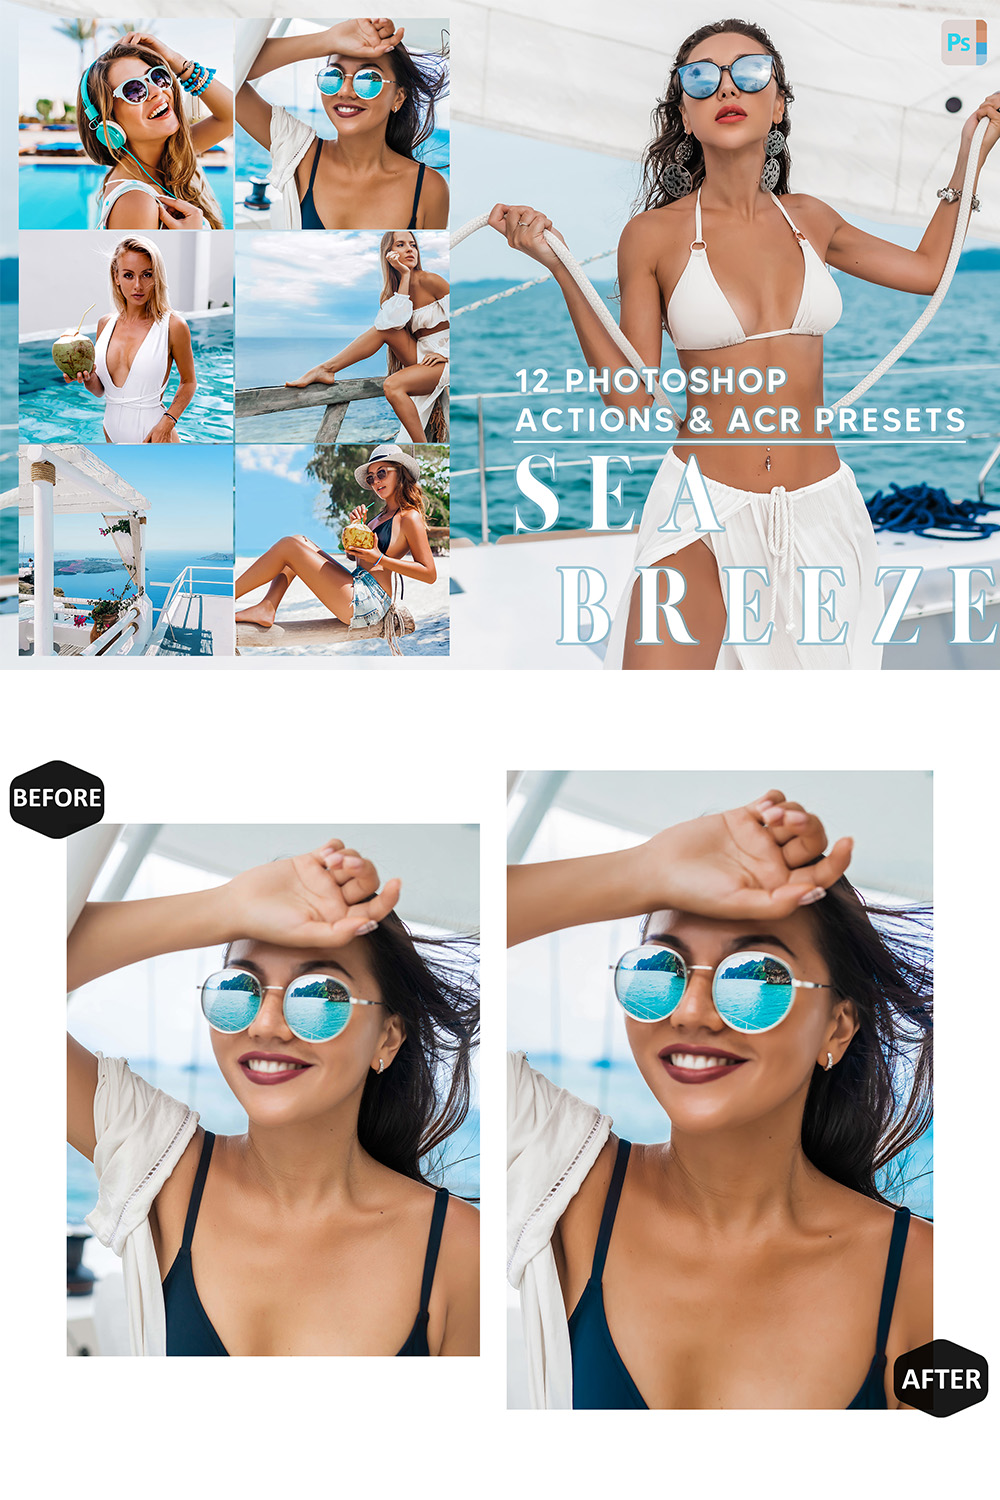 12 Photoshop Actions, Sea Breeze Ps Action, Summer ACR Preset, Bright Ps Filter, Portrait And Lifestyle Theme For Instagram, Blogger pinterest preview image.